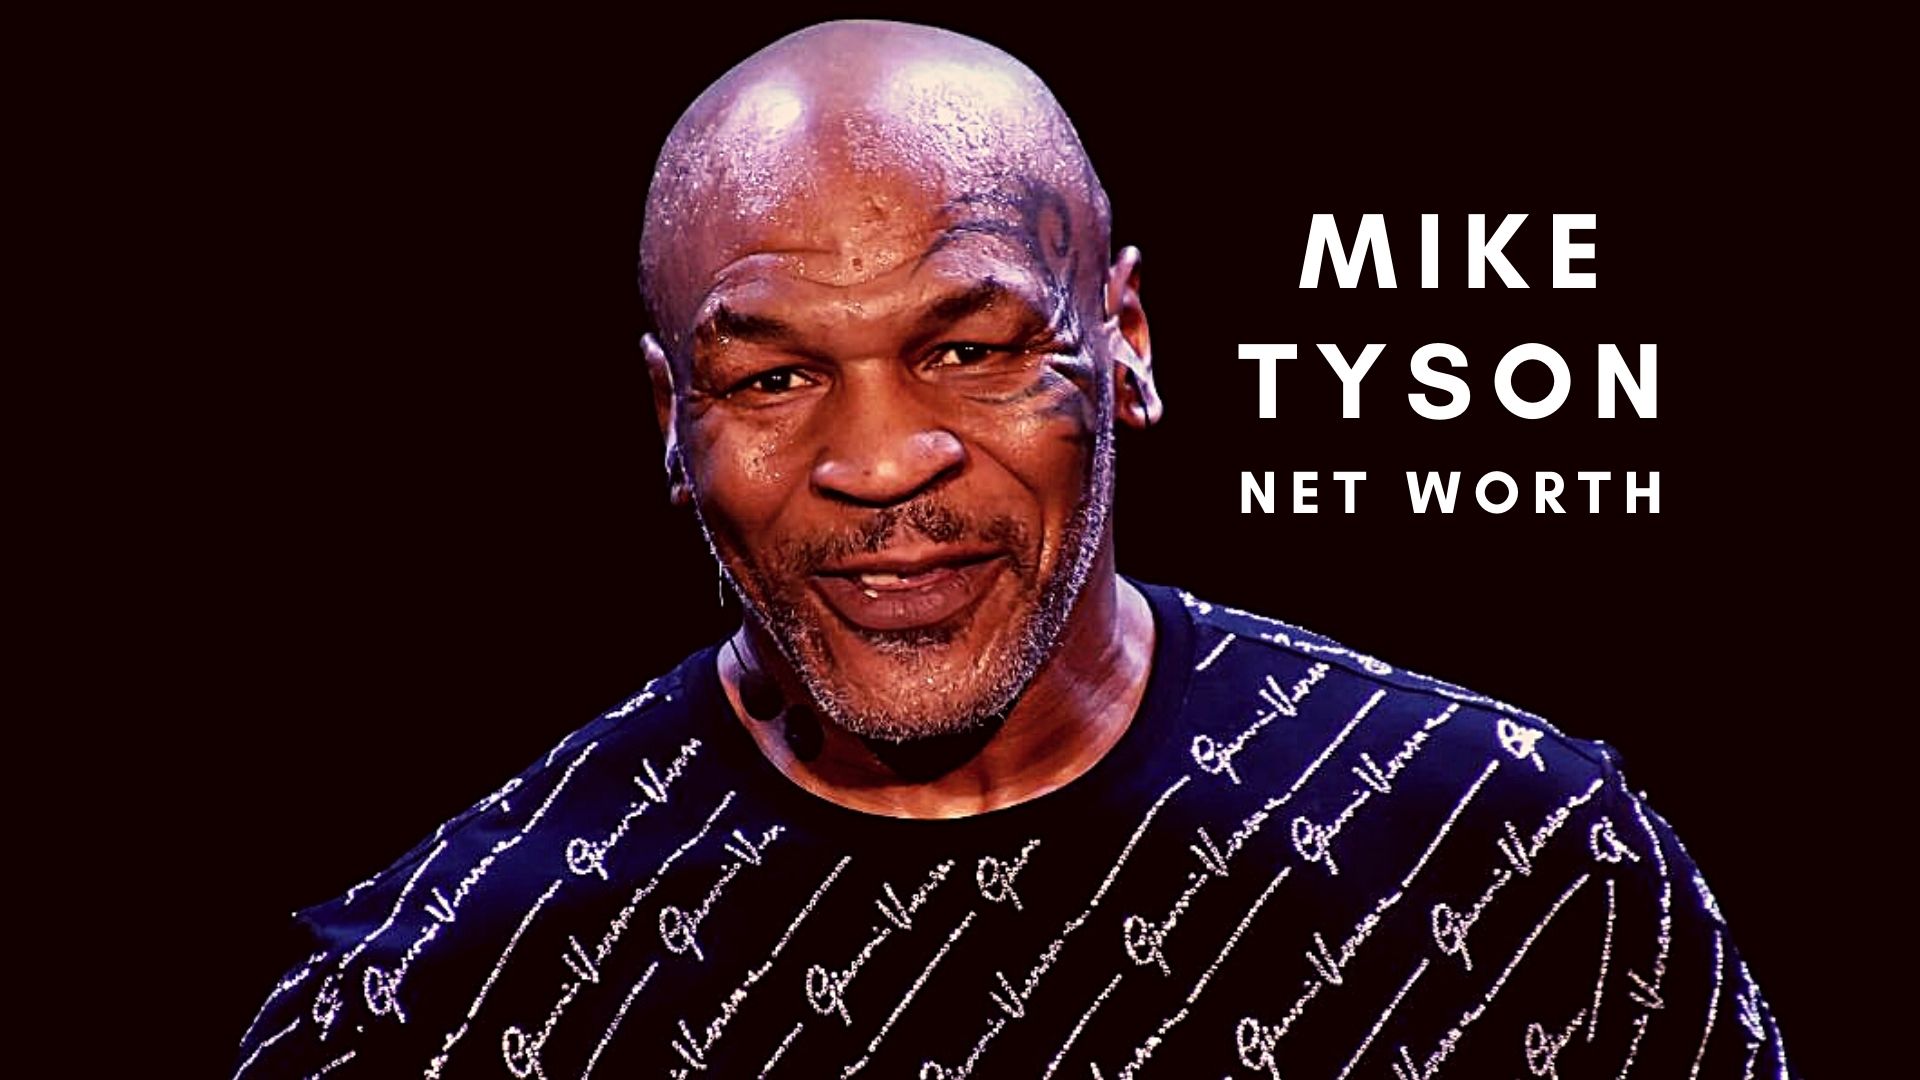 Mike Tyson 2021 Net Worth, Salary, Records, and Endorsements